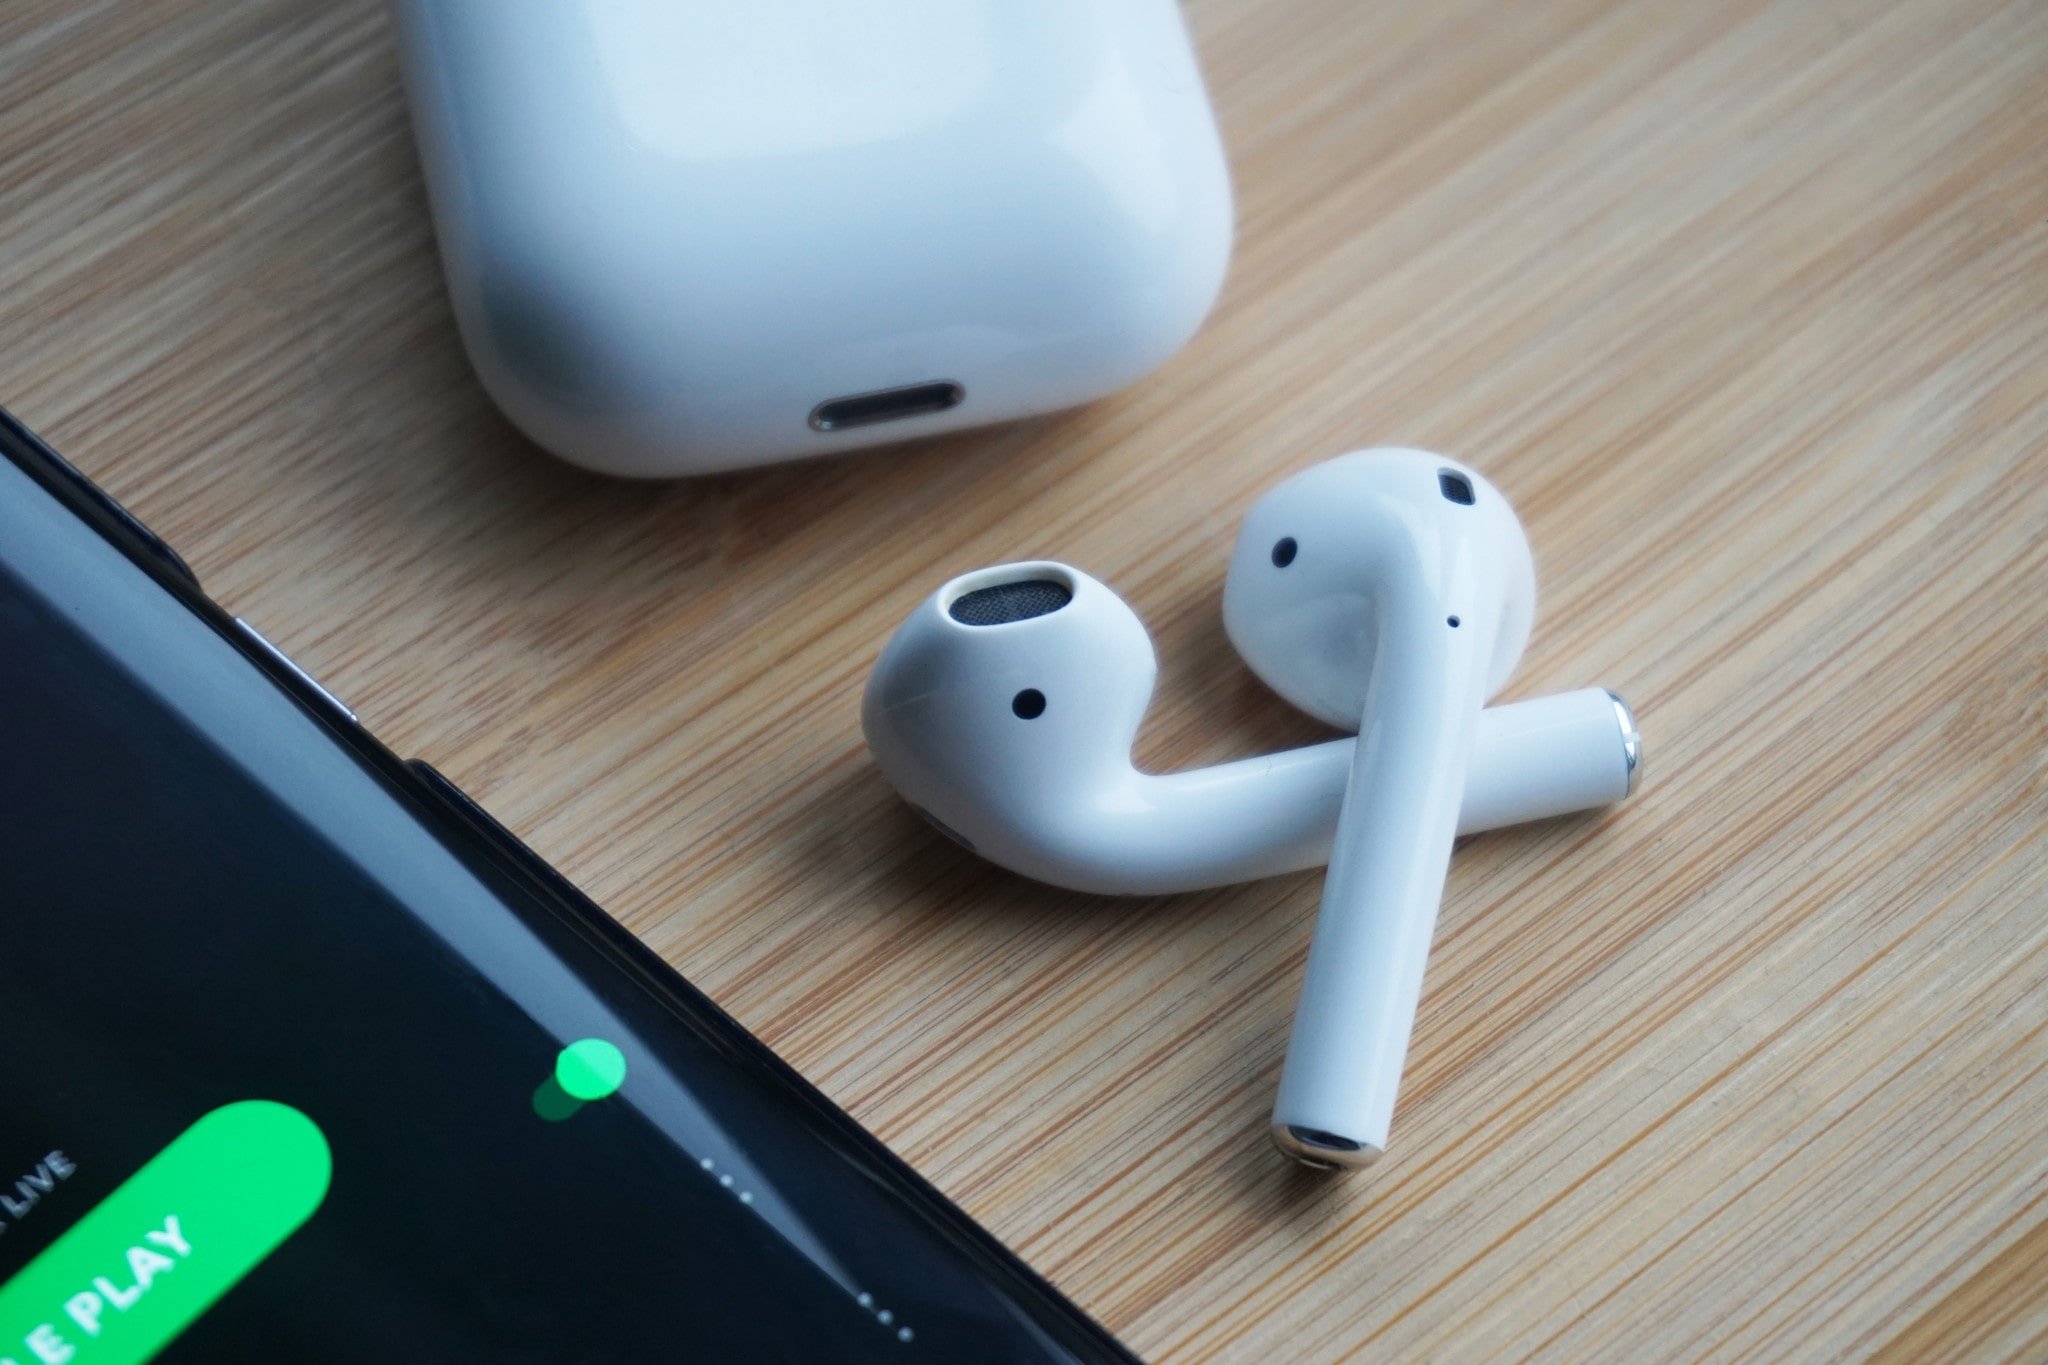 This limited-time Prime deal makes the AirPods the cheapest they've